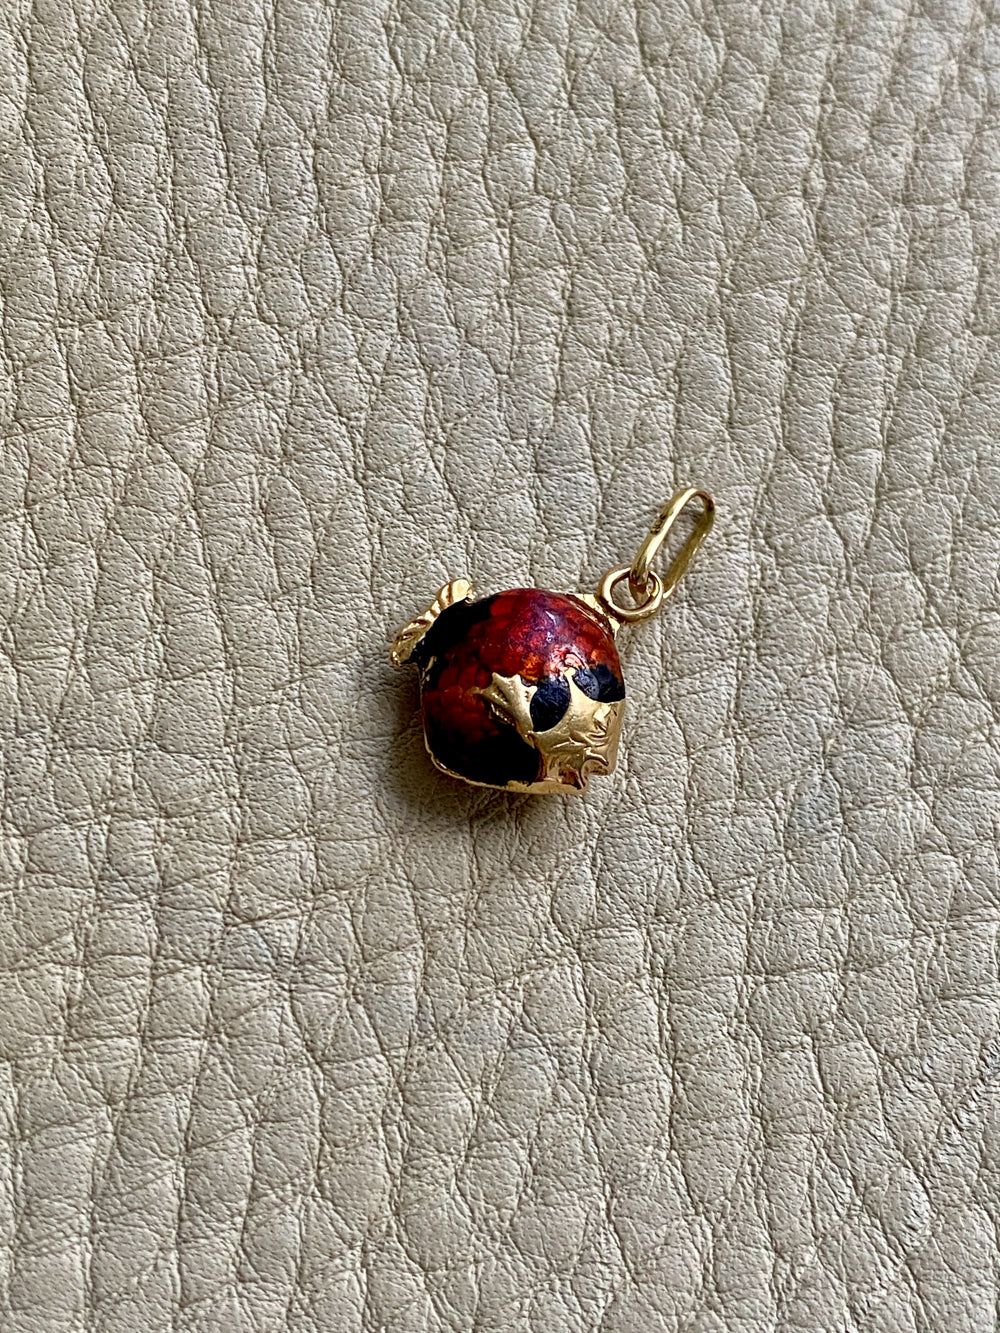 18k gold with red enamel tropical fish pendant or charm